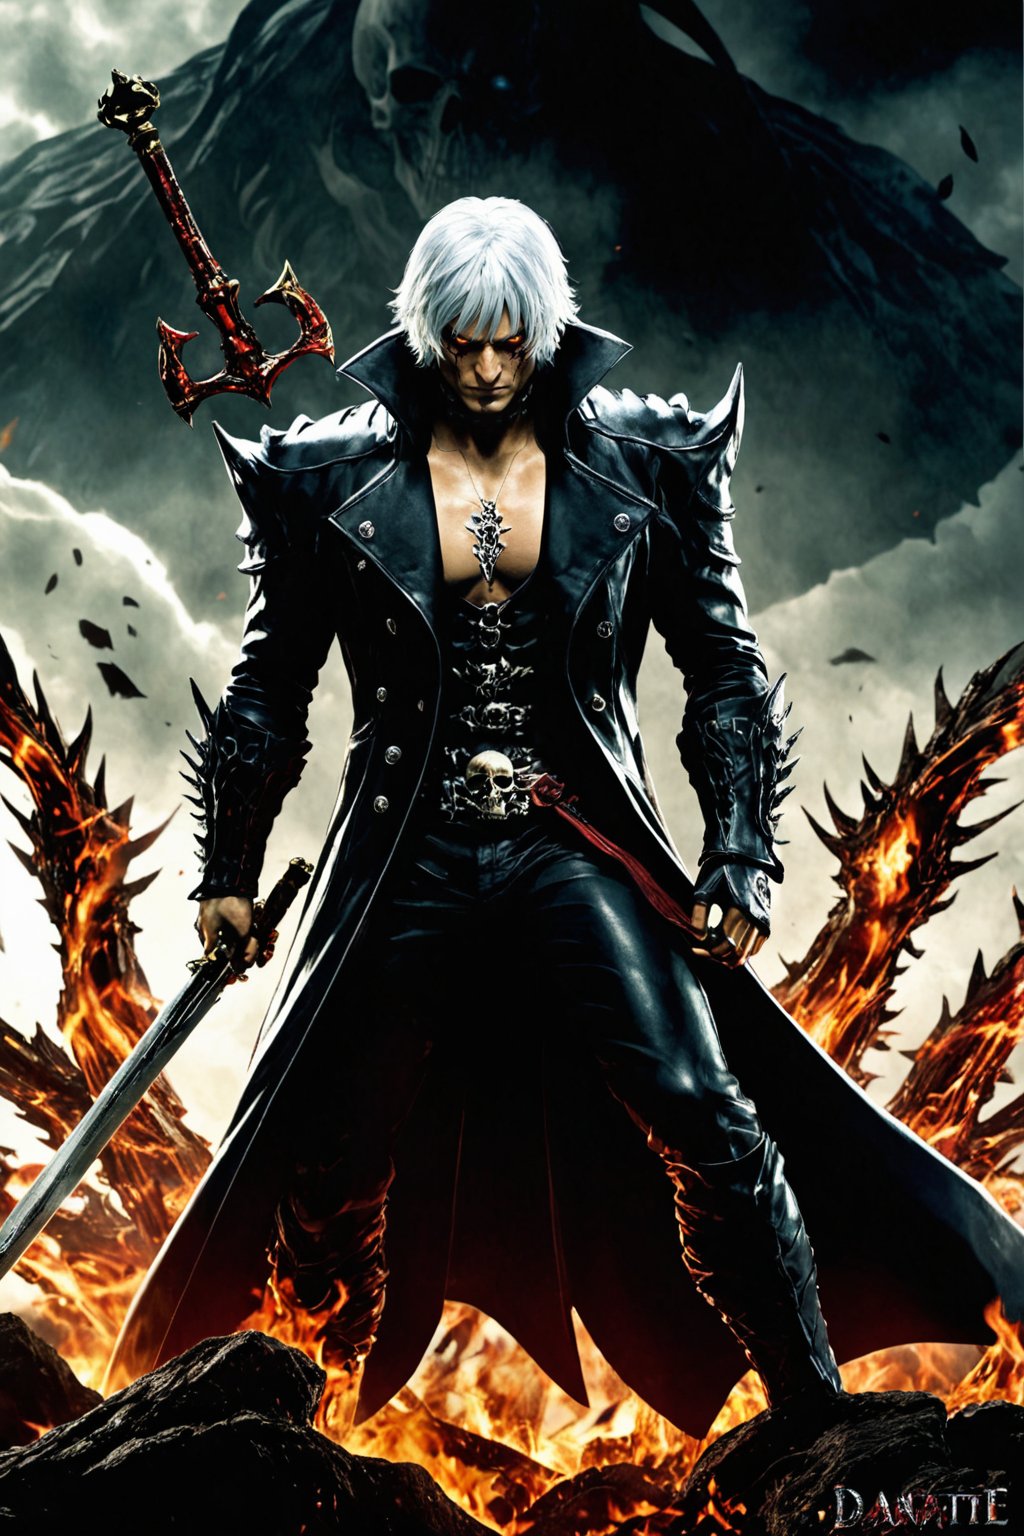 **Overview:** This image likely depicts Dante, the protagonist of the Devil May Cry series, in his iconic devil-hunting attire. As the leader of the Nephilim Order, Dante is known for his bravery and skill in battling demonic forces.

**Main Subject(s):** Dante himself, with a focus on his striking white hair and expressionless face. He wears a skull mask, which adds an air of mystery to his character. His eyes are normal, without their usual fiery intensity, but his overall demeanor conveys a sense of disdain for the world around him.

**Composition:** The composition likely focuses on Dante's figure, with the surrounding environment serving as a backdrop to highlight his character. The use of bold colors and dramatic lighting may add emphasis to Dante's striking appearance and powerful stance. The positioning of Yamato across his back creates a sense of depth and dimensionality in the image.

**Emotional Impact/Mood:** This image is likely to convey a sense of detachment, as if Dante has seen it all before and doesn't bother to care about the petty concerns of the world. His expressionless face suggests a level of emotional numbness, perhaps a result of his experiences battling demonic forces. The overall mood is dark and foreboding, hinting at the apocalyptic consequences that await should the forces of darkness continue unchecked.

**Technical Information (Assumptions):** Assuming this is a digital artwork or concept art, the artist may have used Adobe Photoshop or similar software to create the image. The color palette might include bold whites, dark grays, and possibly some dark blues or purples to emphasize the darkness of the skulls and the underworld. Texture effects could be used to enhance Dante's armor, both Rebellion and Yamato swords, and the pile of skulls.